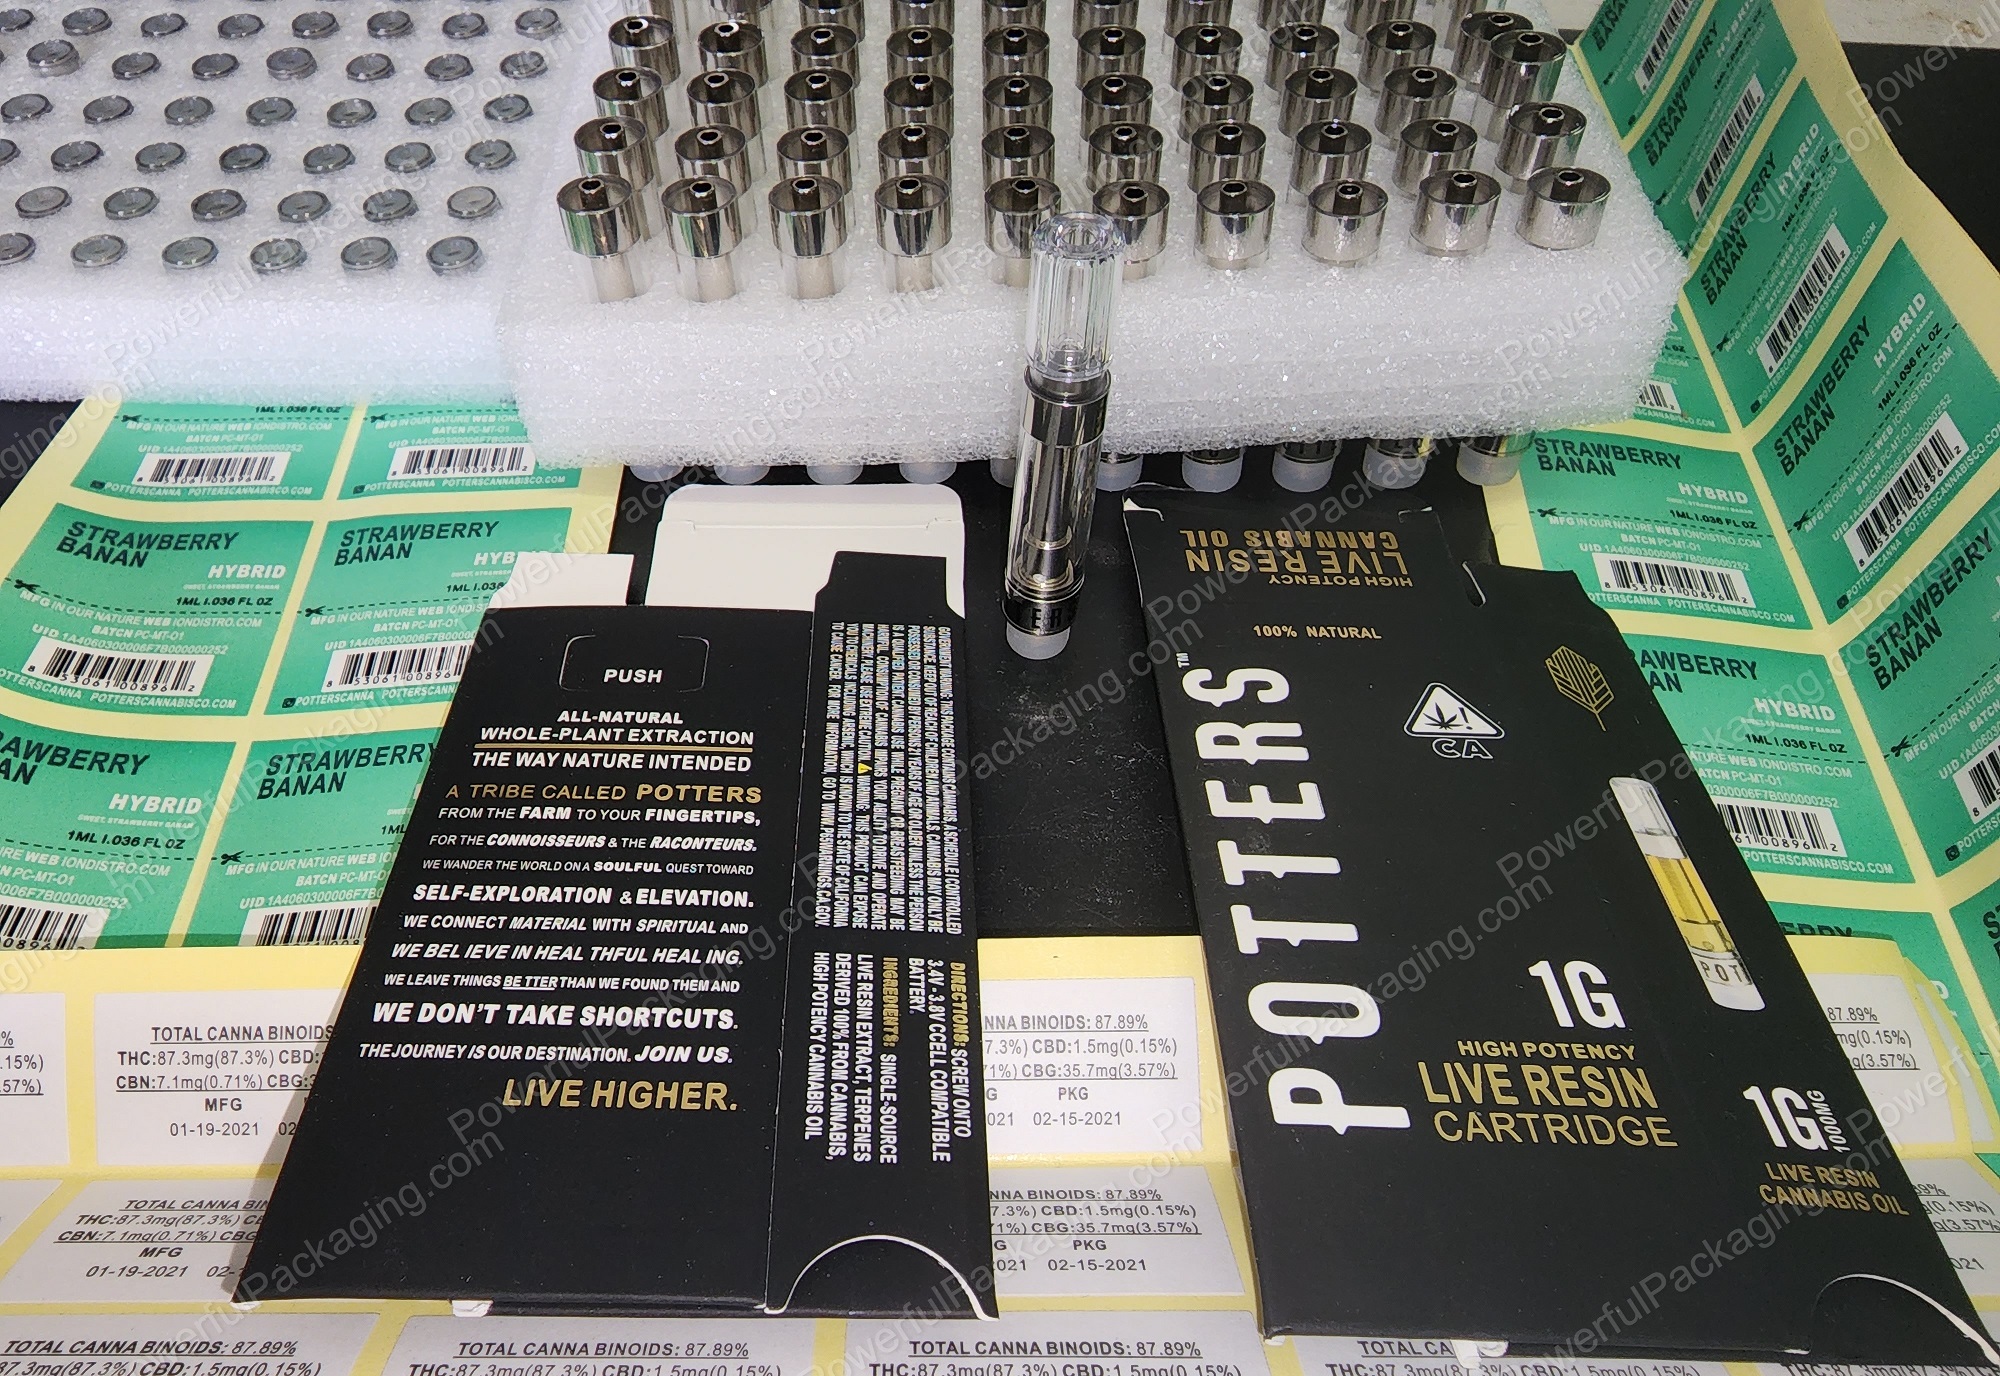 Potters Live Resin Cartridge 1000mg (1Gram) Complete Set (Stickers